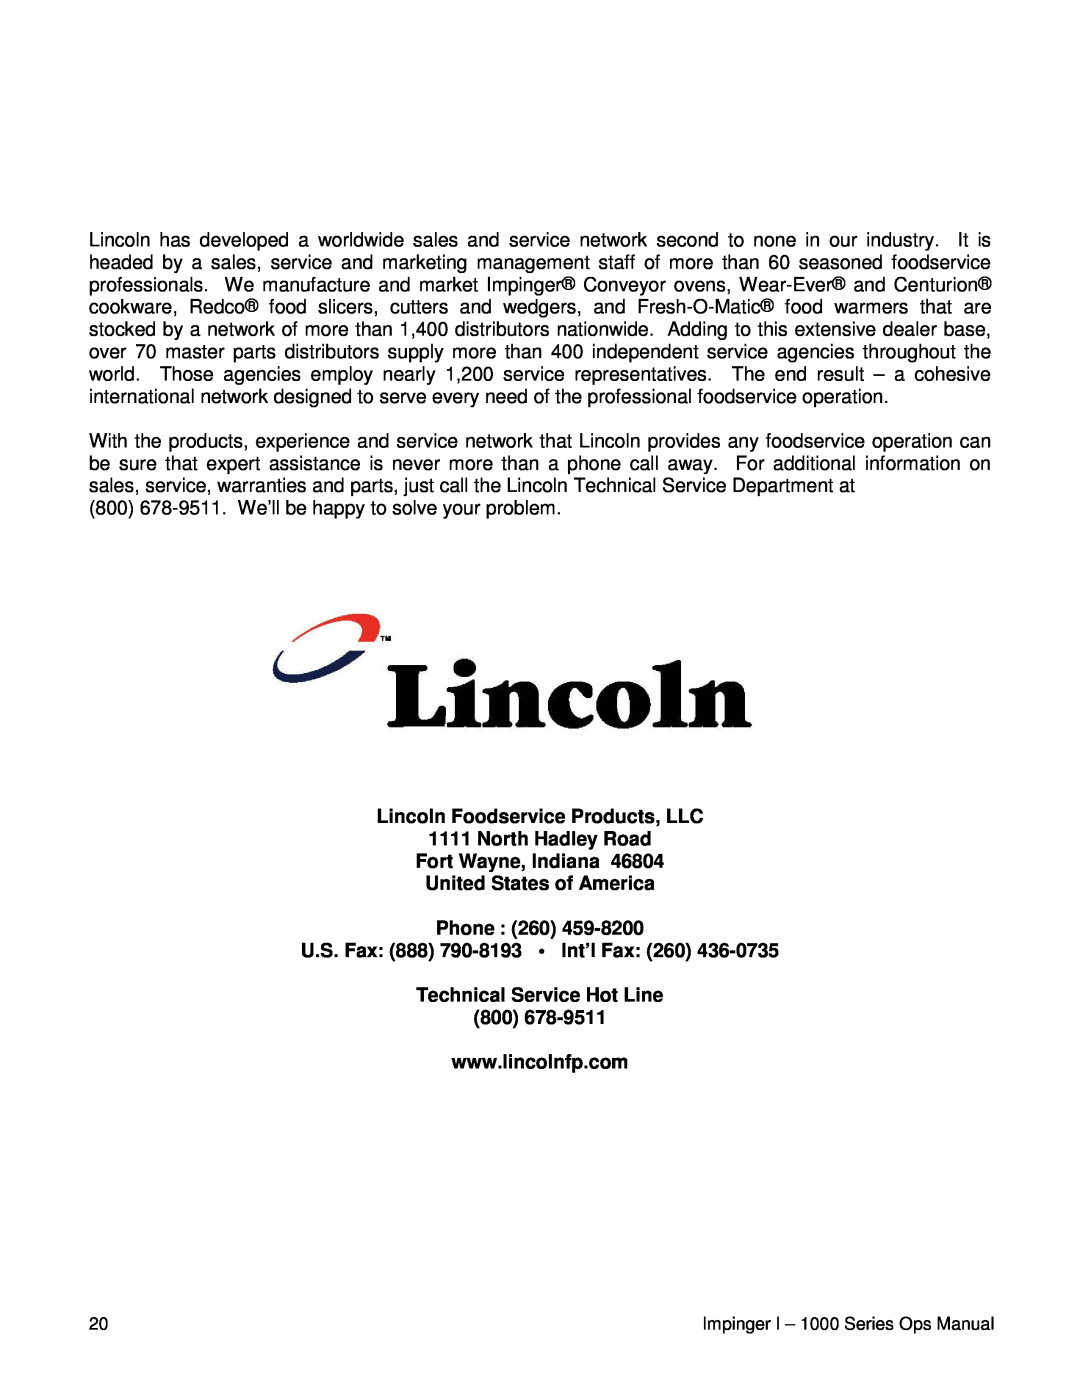 Lincoln 1000 Lincoln Foodservice Products, LLC, North Hadley Road Fort Wayne, Indiana, U.S. Fax 888 790-8193 Int’l Fax 